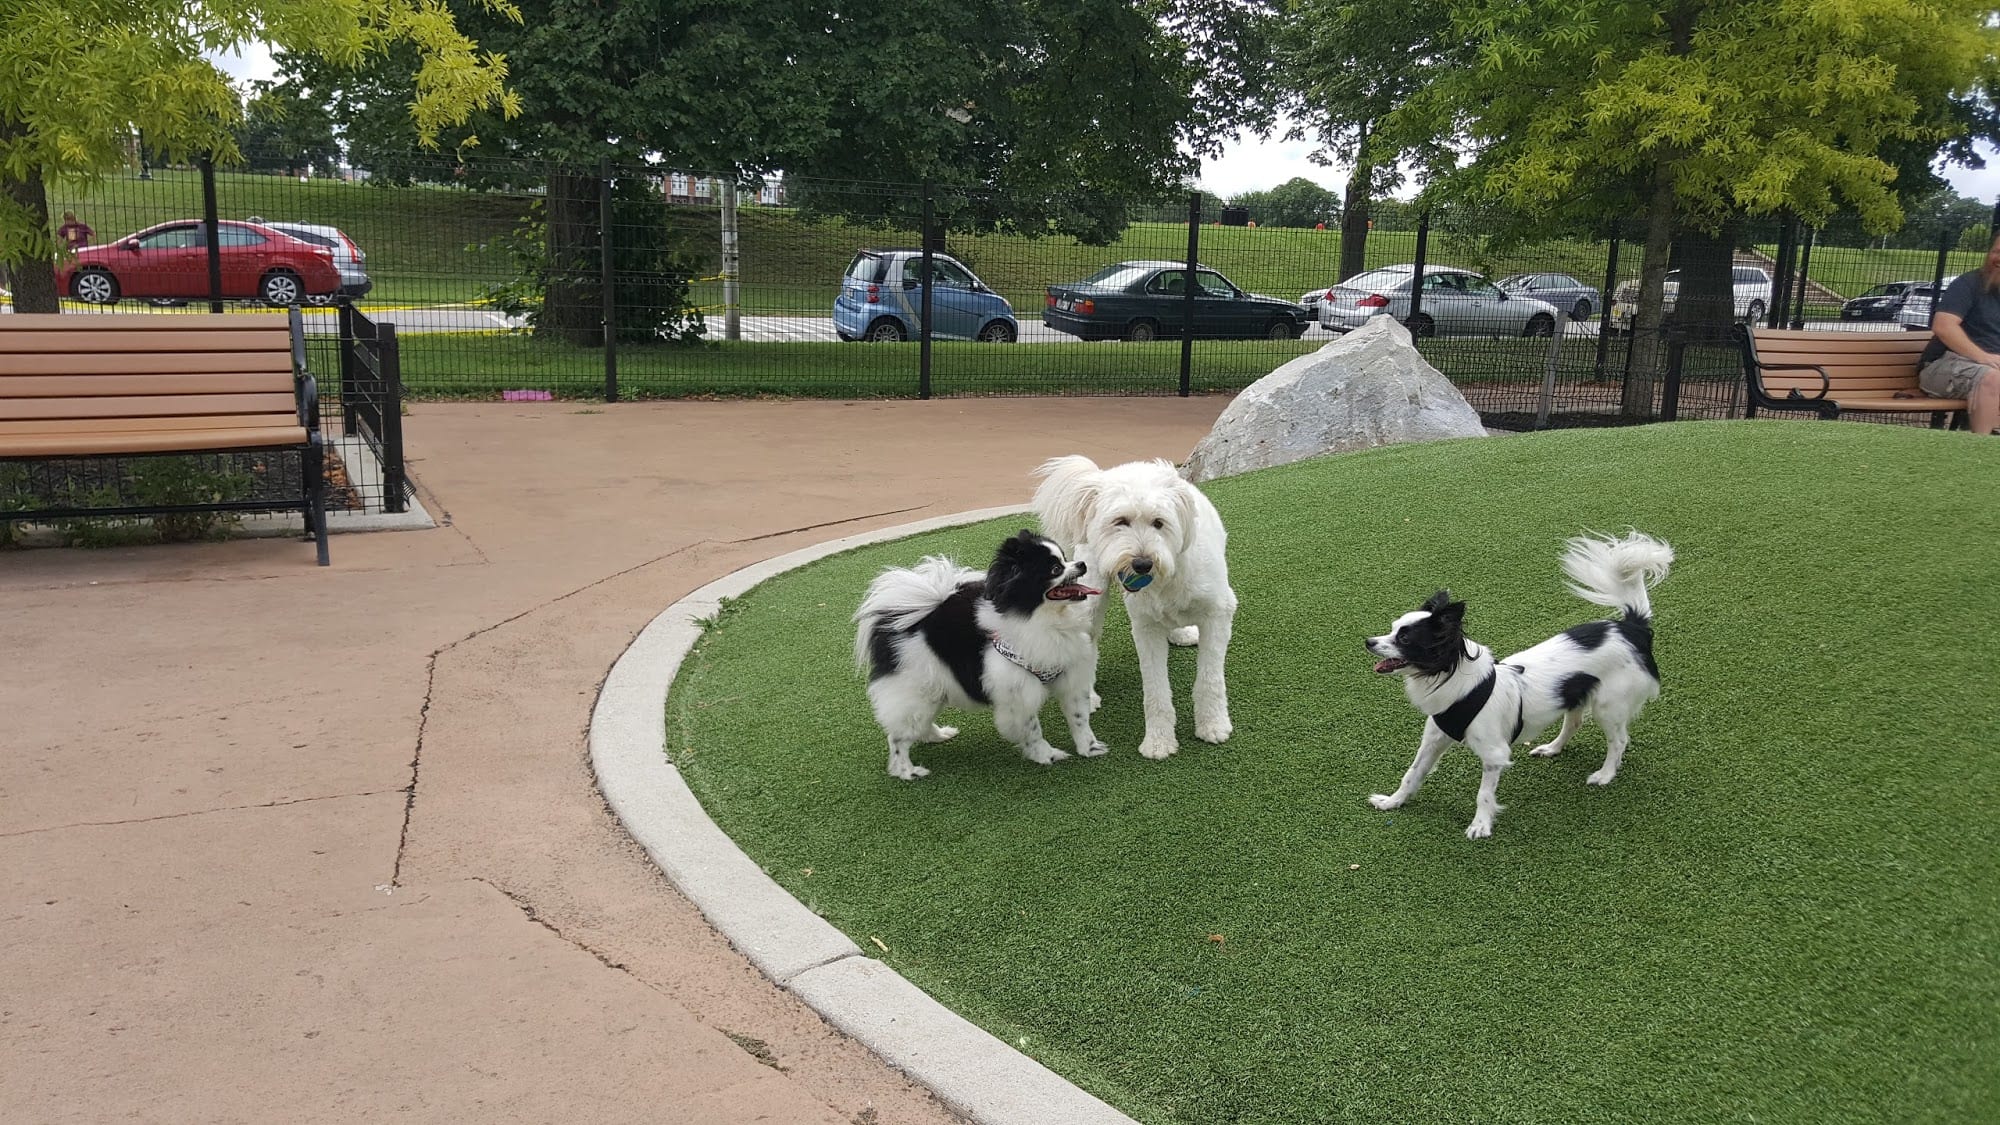 Three dogs playing on Perfect Turf PetGrass at the Patterson Dog Park in Baltimore MD.